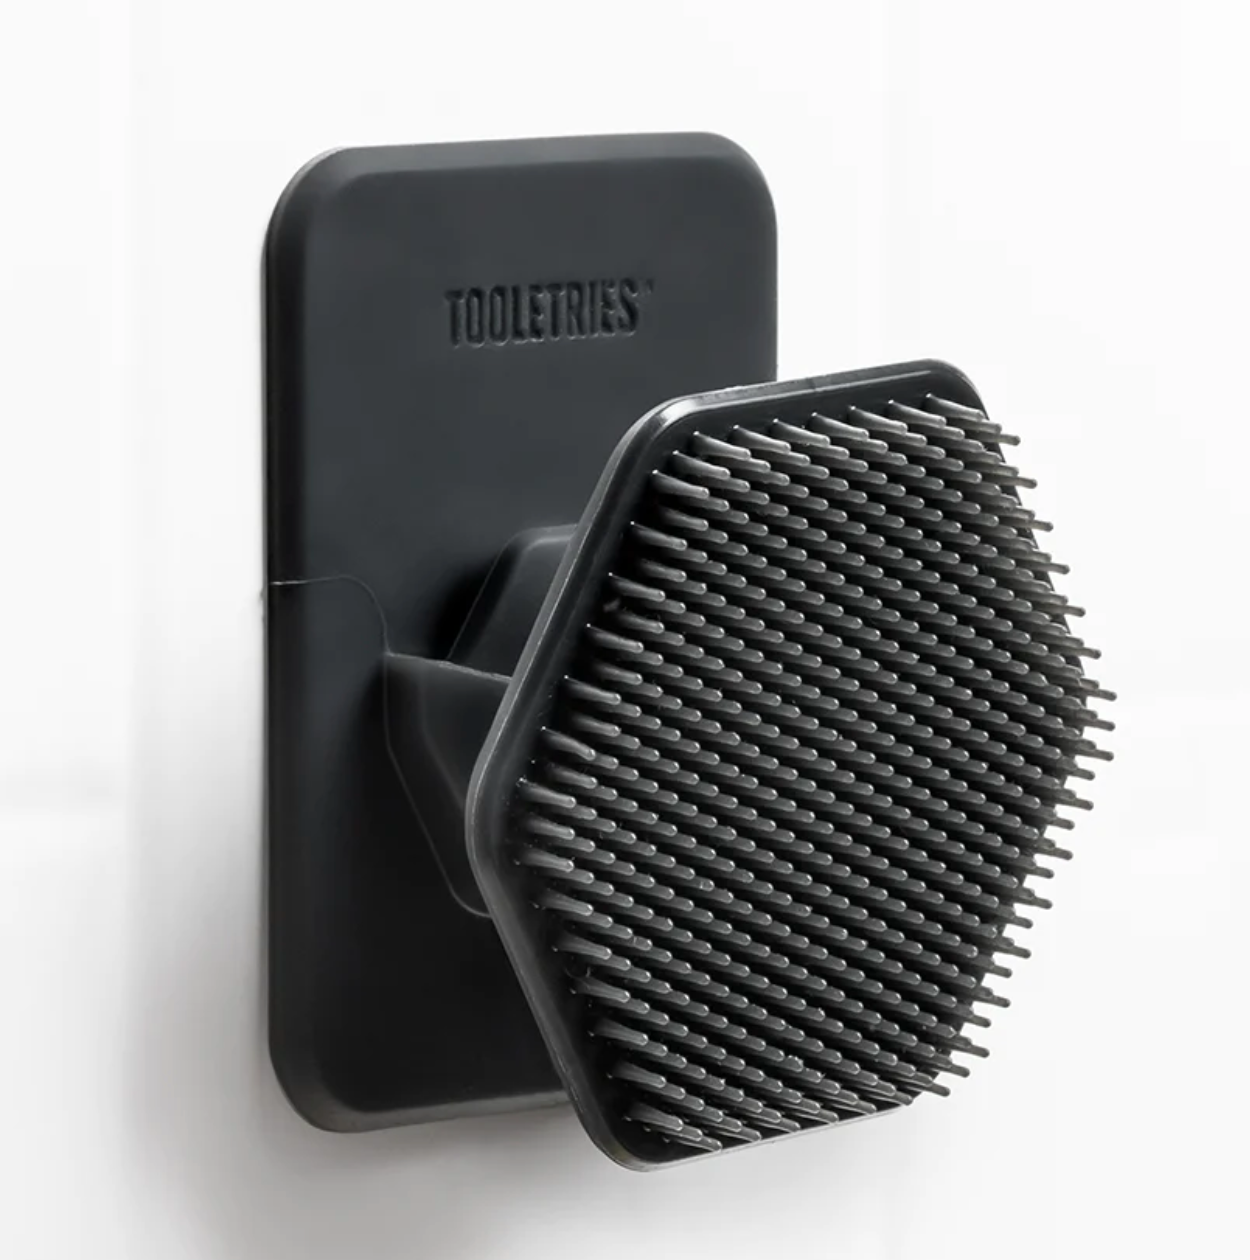 Toolertries Face Scrubber & Holder